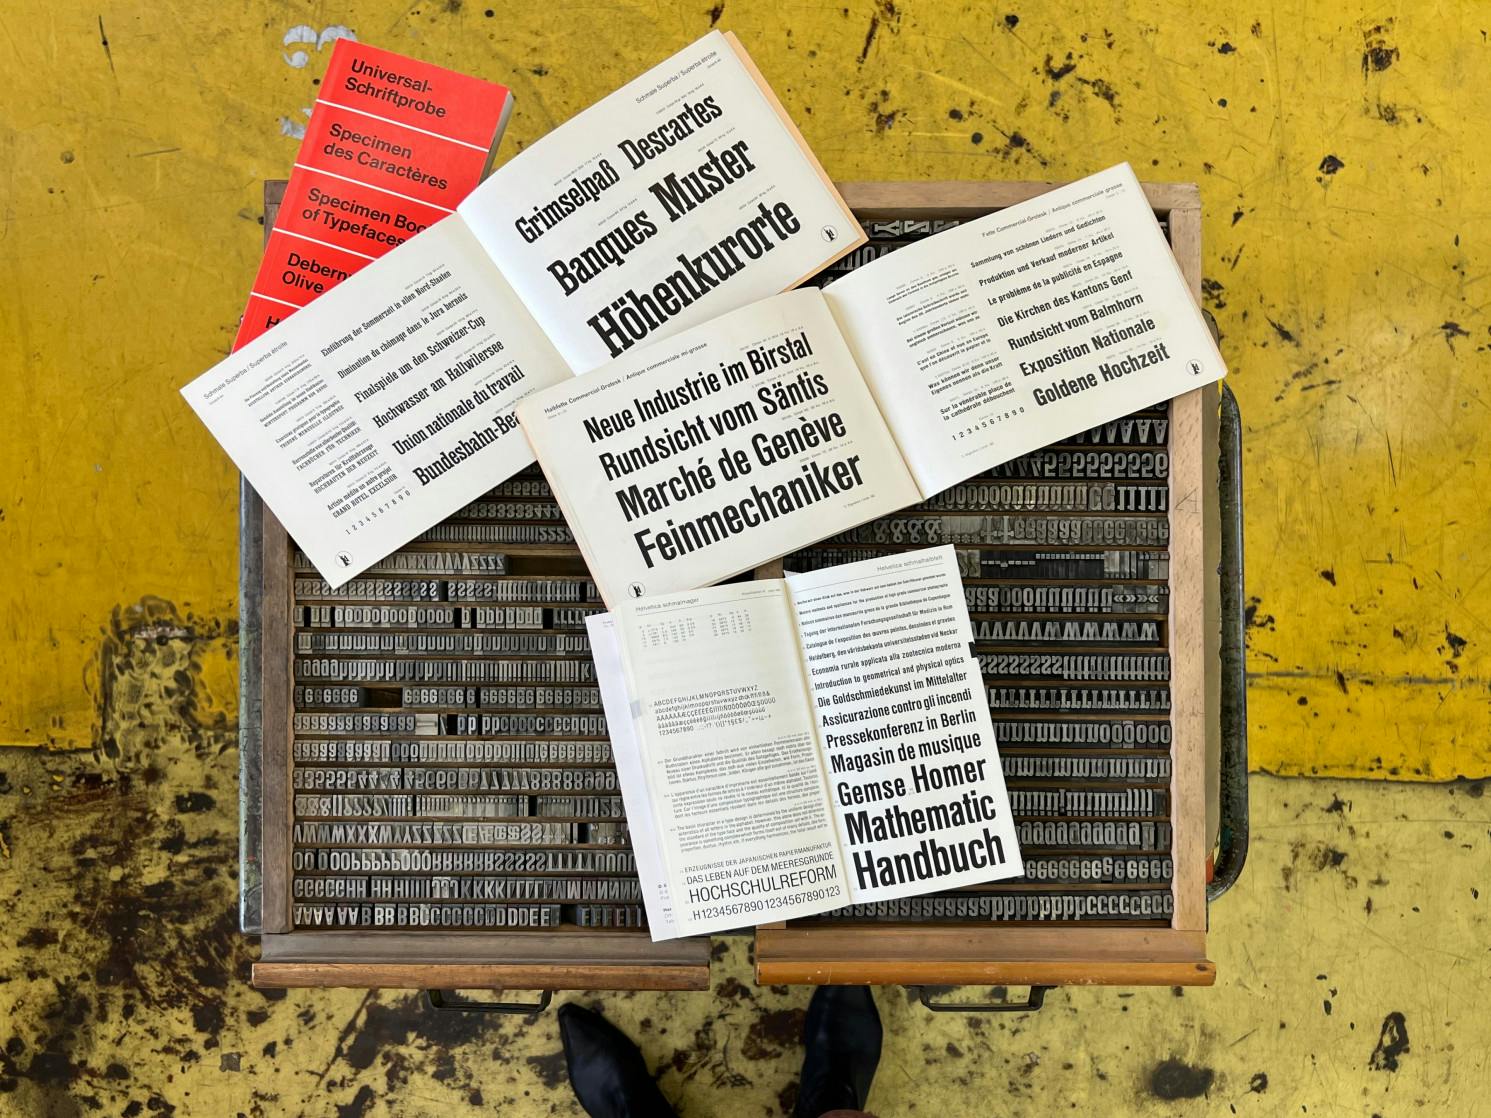 Type cases with physical sets of Commercial Grotesk and Superba with printed specimen books of Superba, Commercial Grotesk and Helvetica Schmalhalbfett